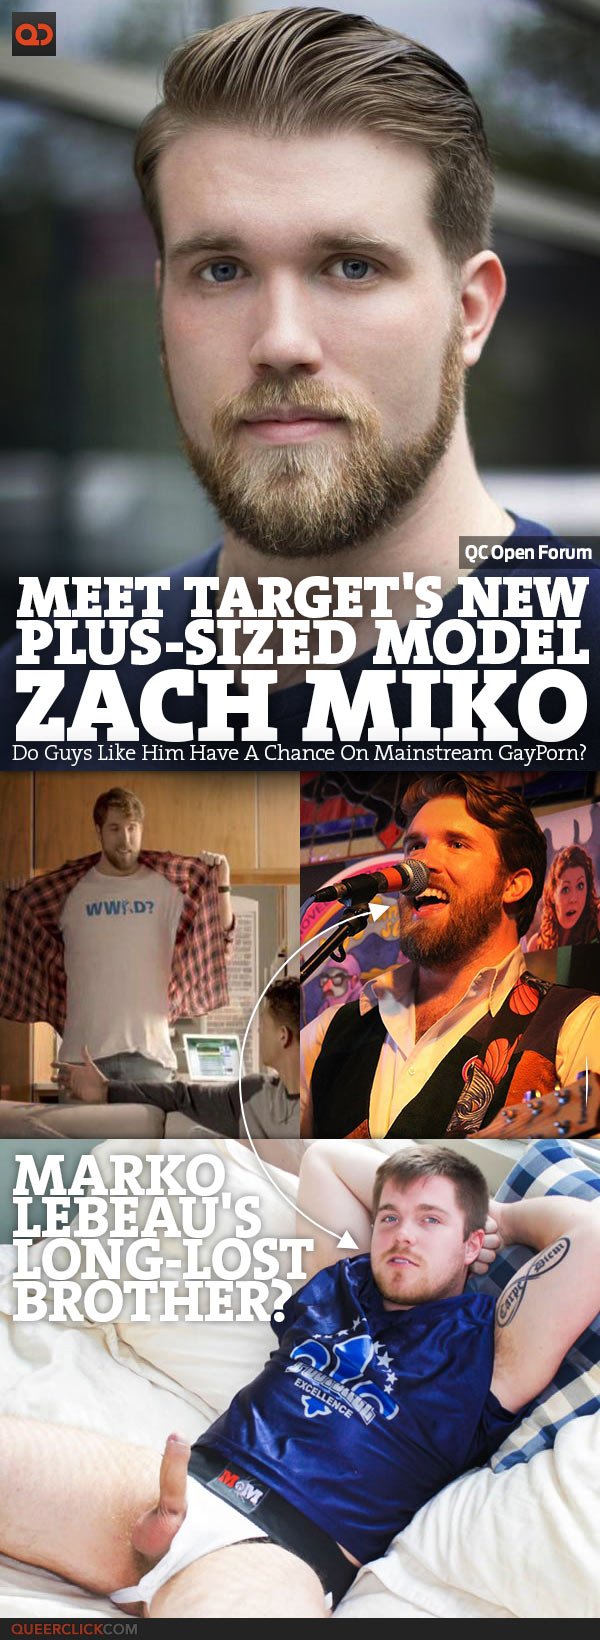 QC Open Forum: Meet Target's New Plus-Sized Model Zach Miko - Do Guys Like Him Have A Chance On Mainstream Gay Porn?